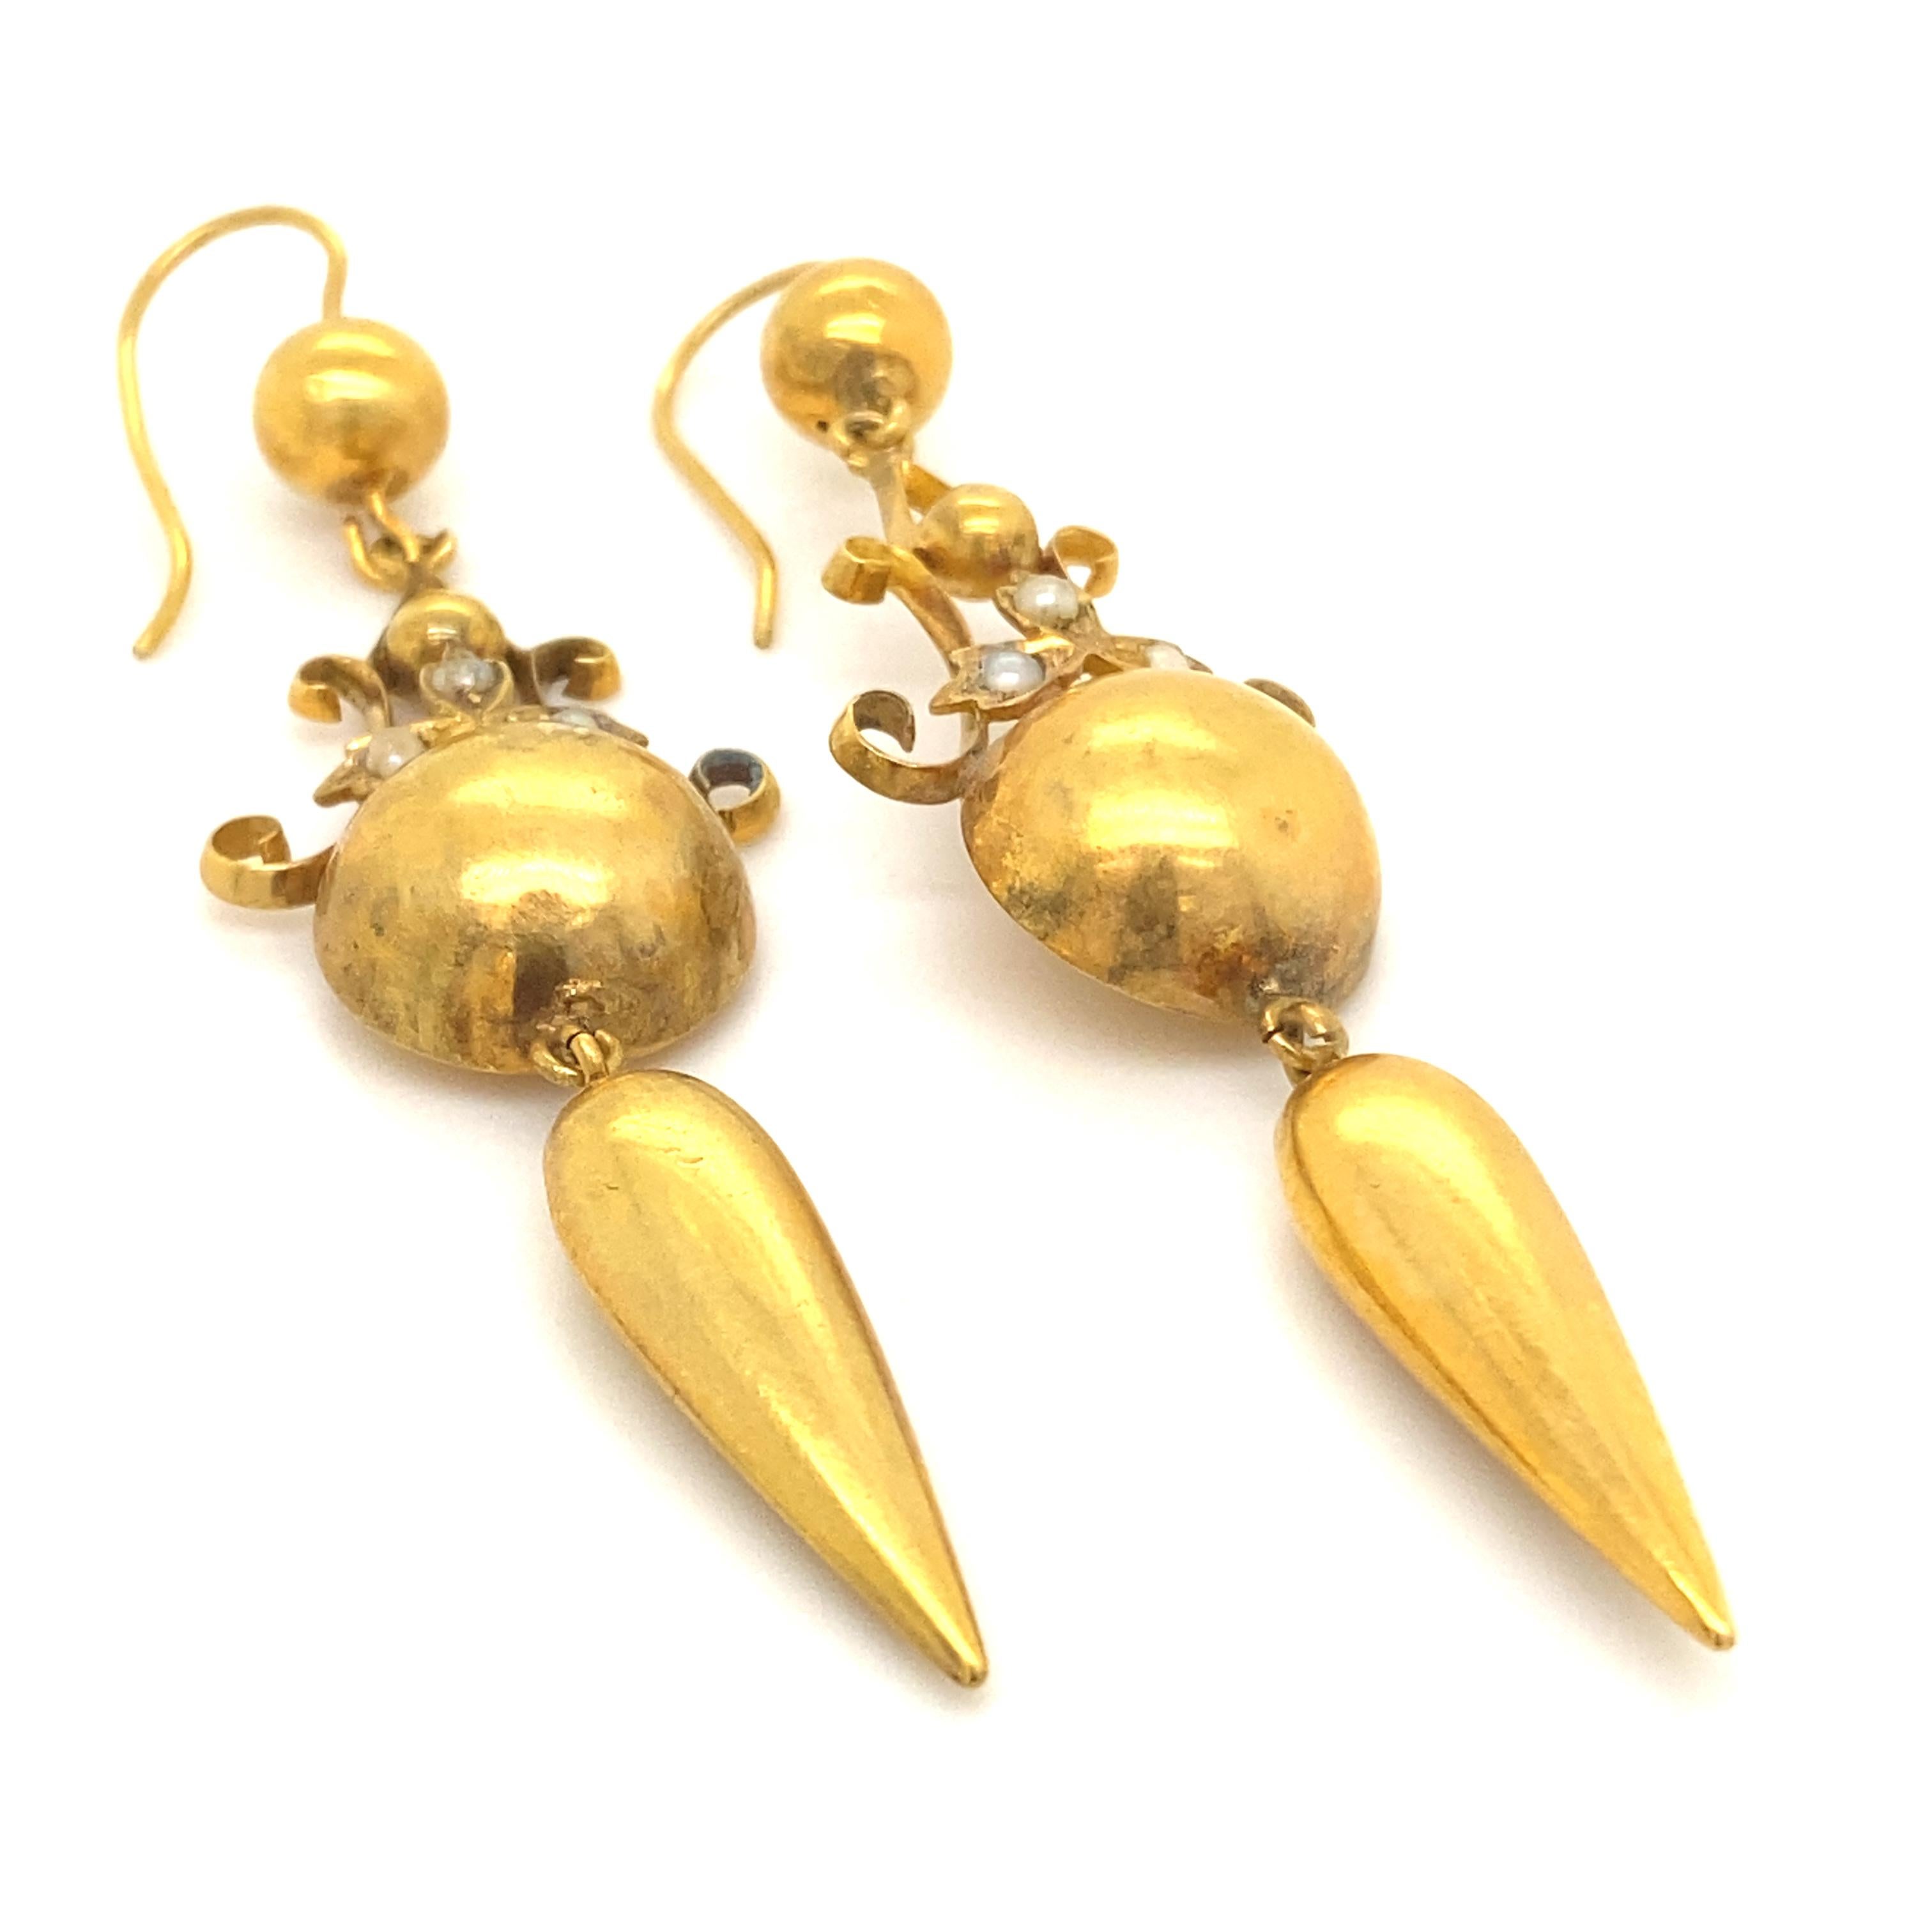 A pair of Victorian seed pearl 18 karat yellow gold drop earrings.

Featuring half balls and tassels suspended from hook and wire fittings, topped with open wirework designs each earring studded with three sweet seed pearls.

These are crafted from